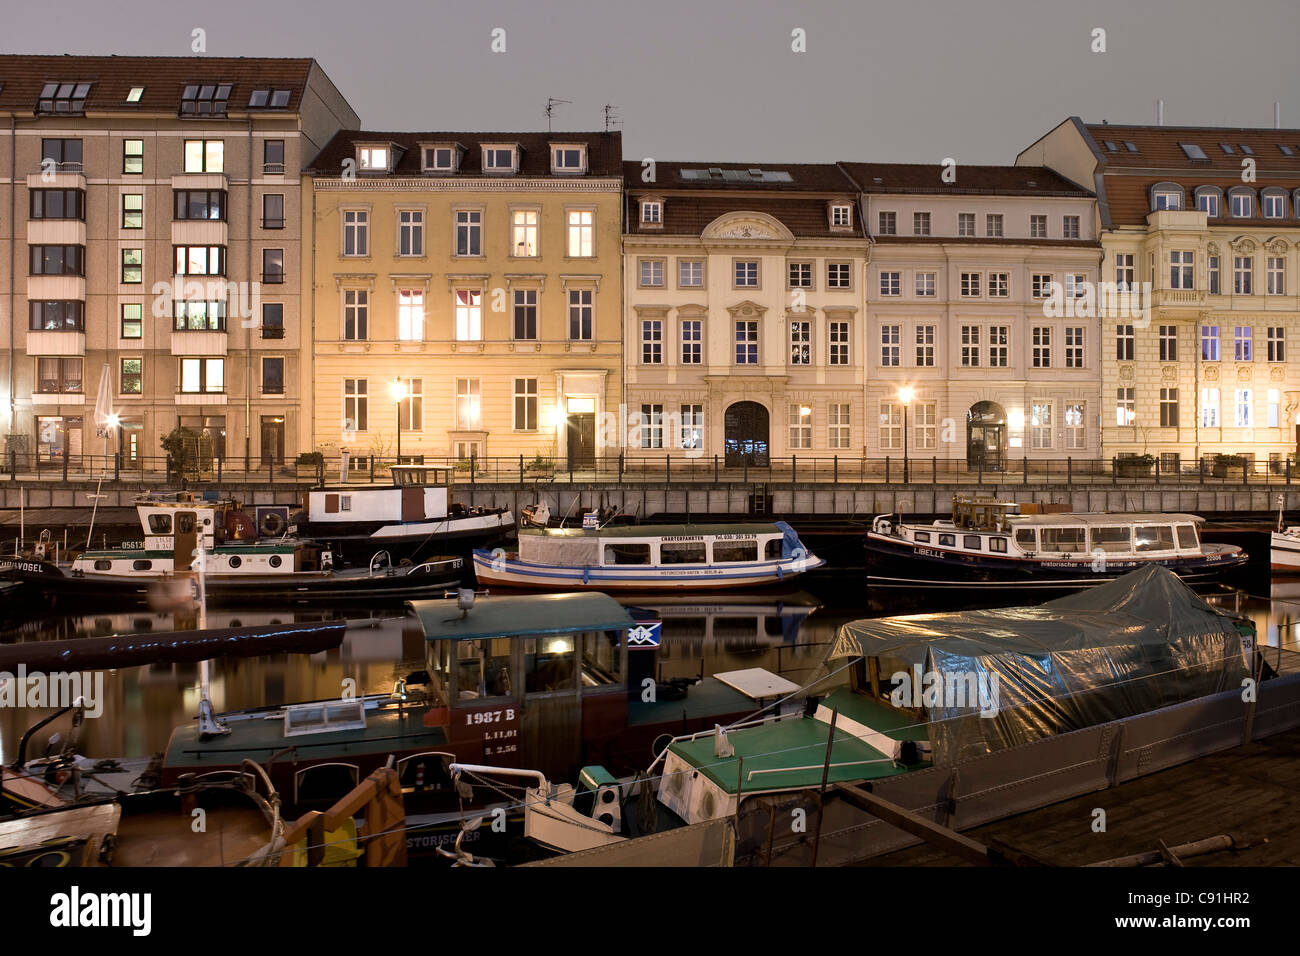 Houses and boats in the evening, Maerkisches Ufer, Berlin, Germany, Europe Stock Photo